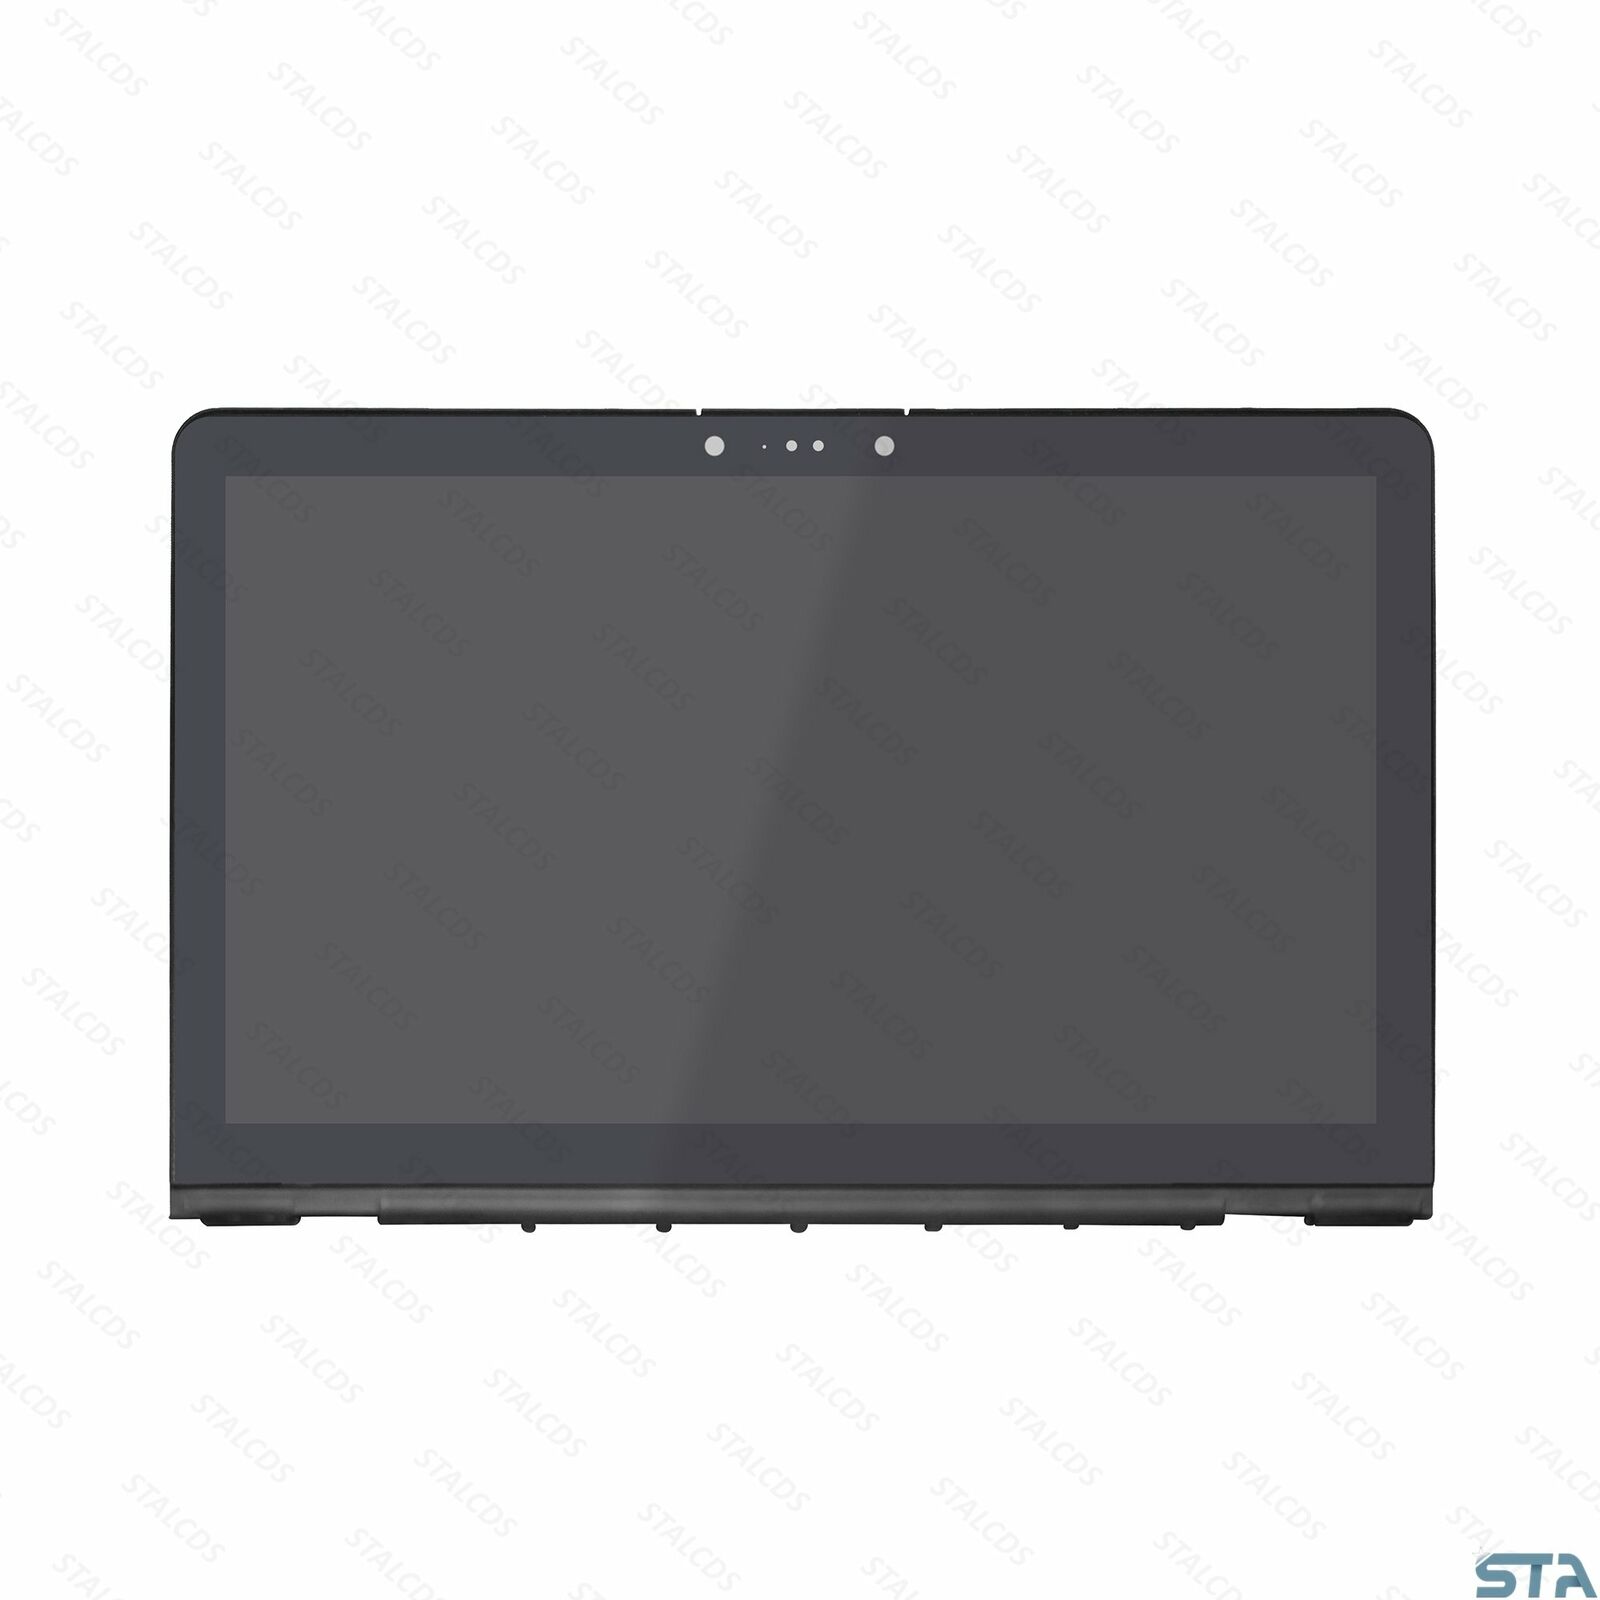 FHD LCD Touch Screen Digitizer Display for HP ENVY 15T-AS 858711-001 2D Webcam